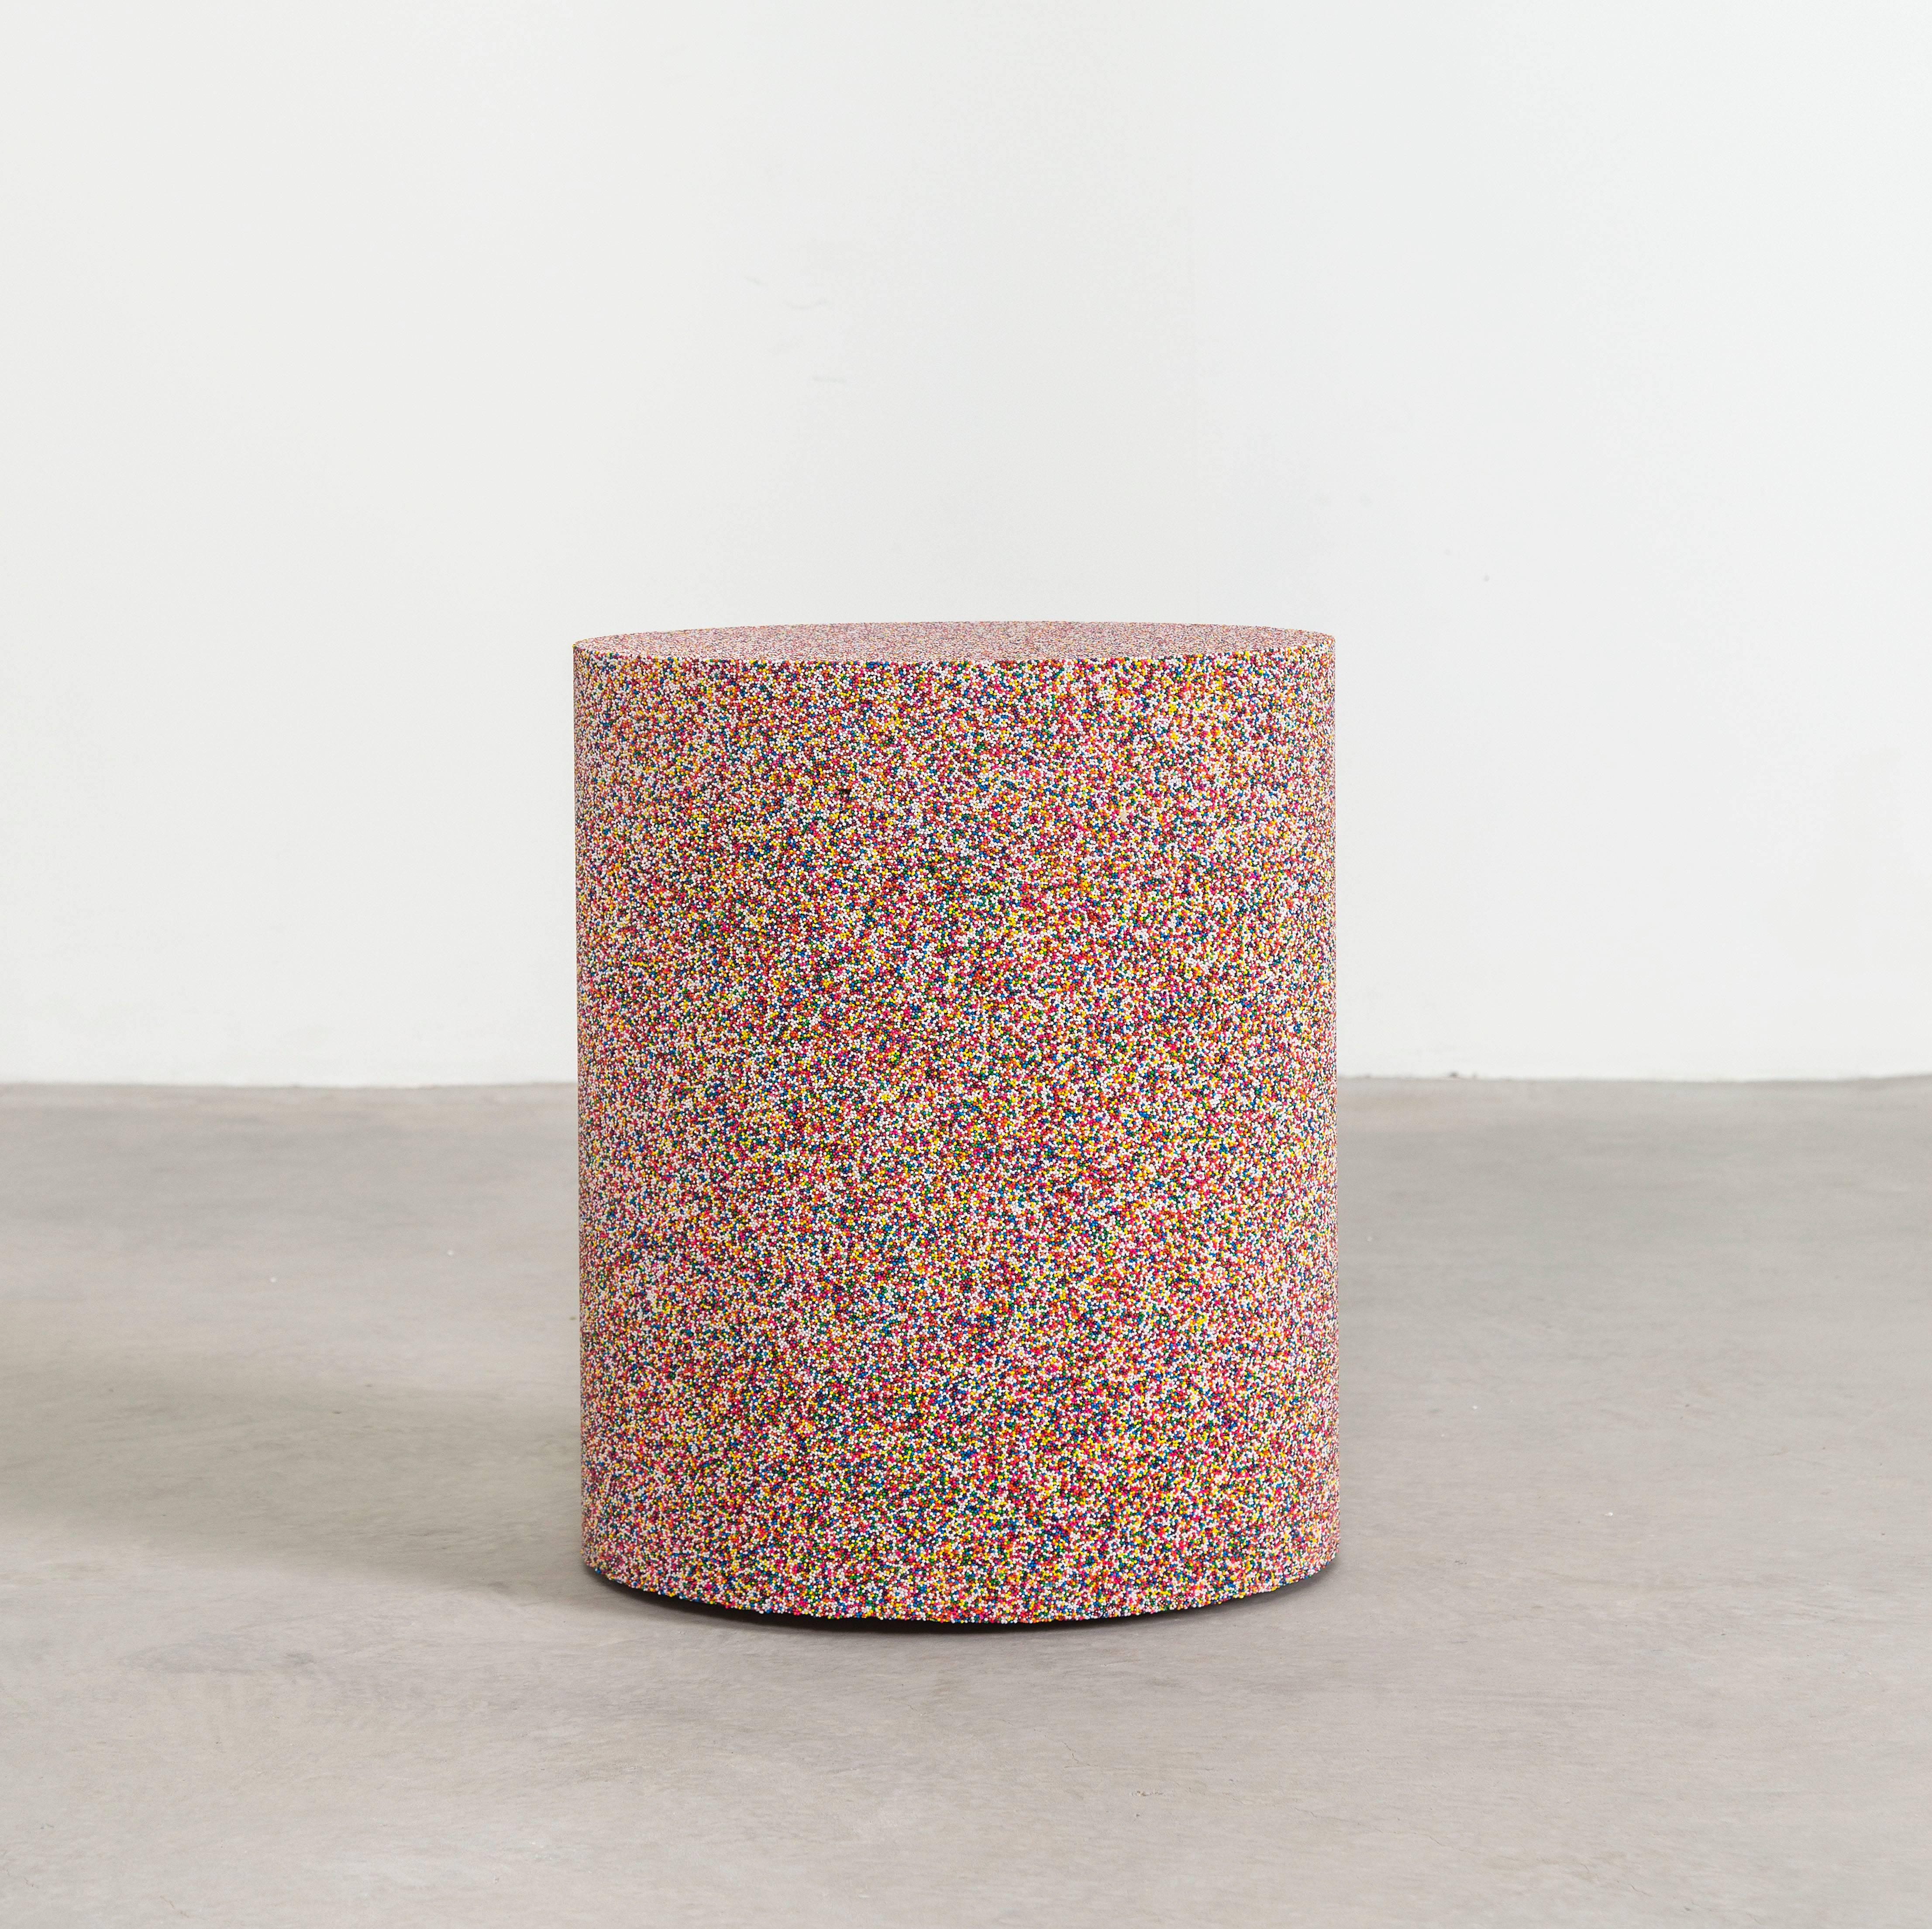 Composed from rainbow sprinkles, the made-to-order drum has a hollow cavity and maintains an organic texture and sophisticated composition. The piece has a hollow cavity and weighs approximately 40lbs.